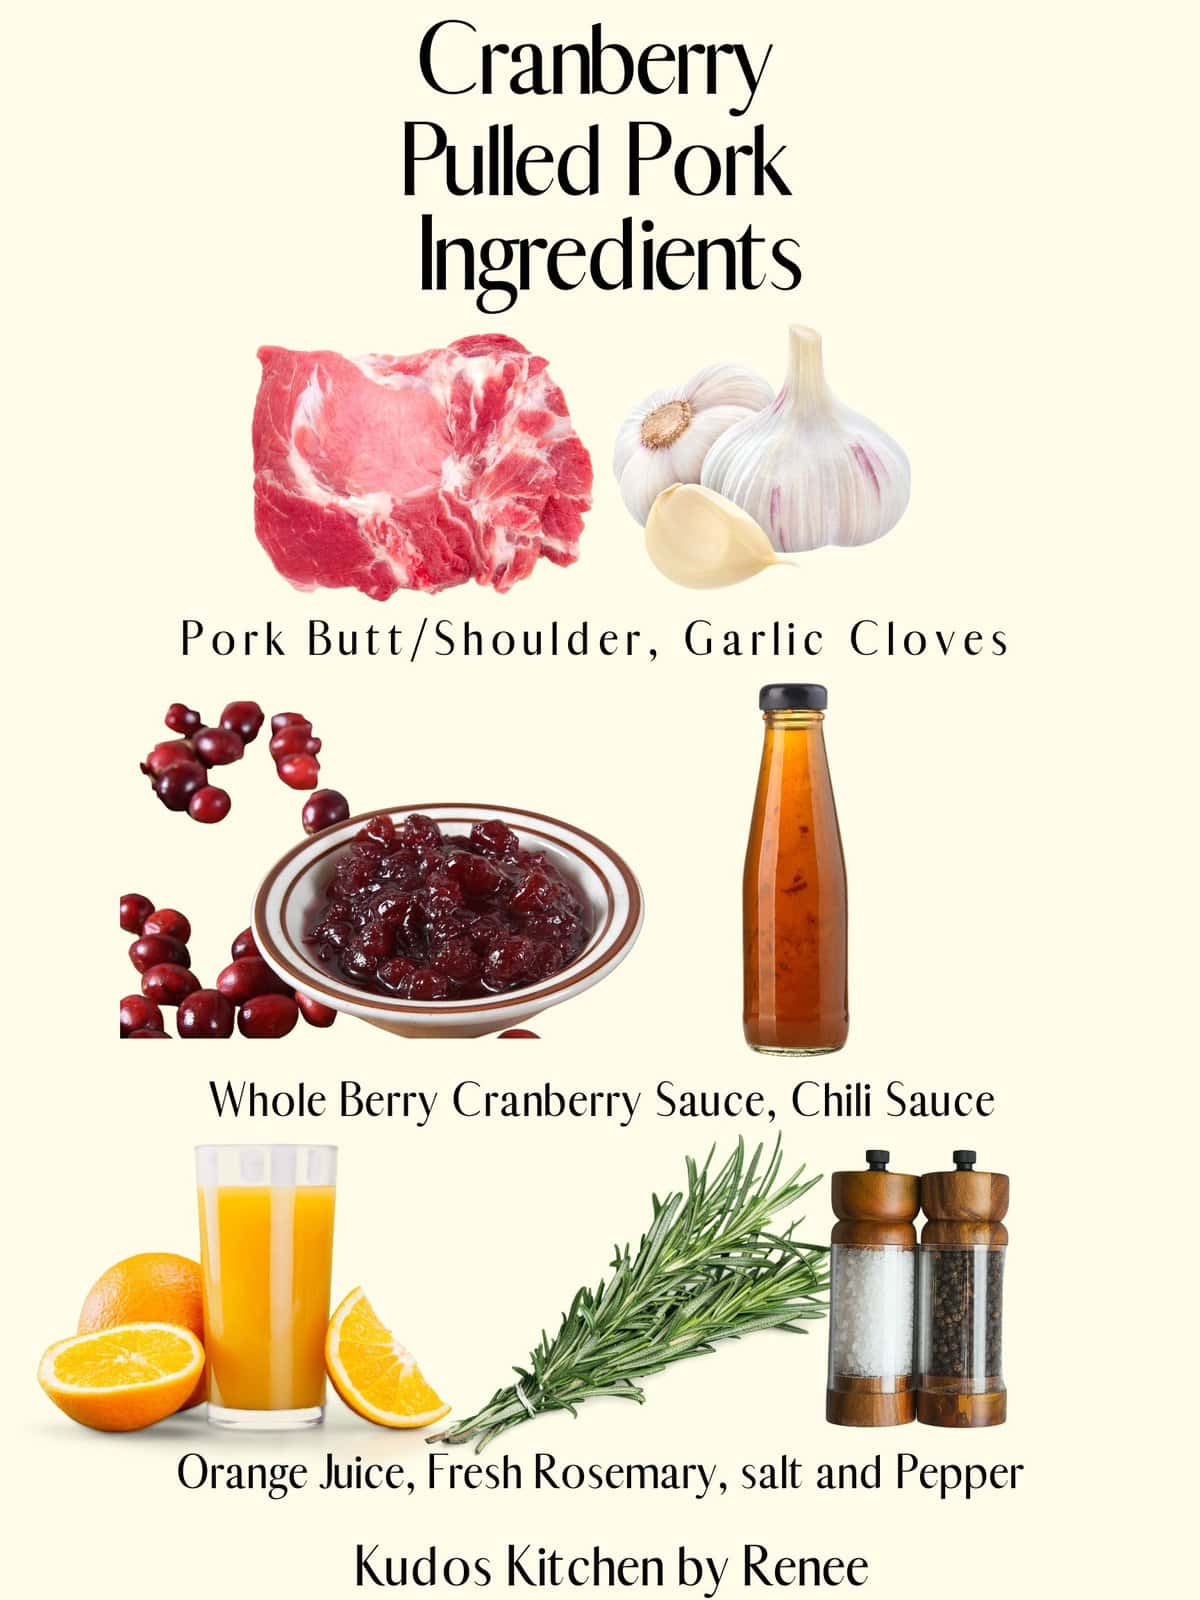 A visual ingredient list for making Slow Cooker Cranberry Pulled Pork.